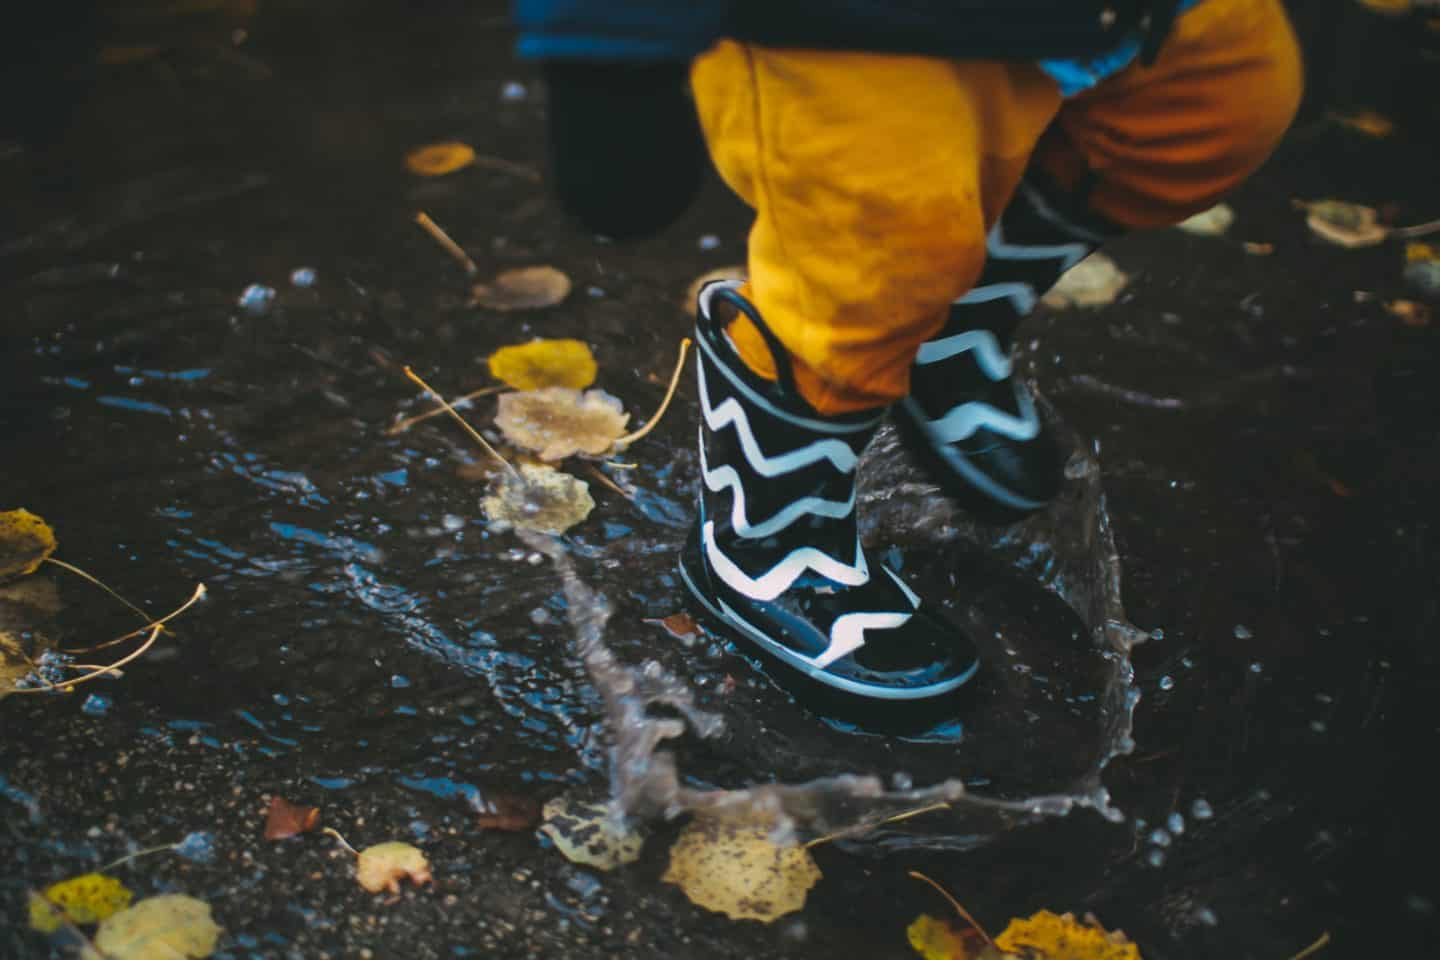 best twin boy and girl matching outfits, rainboots splashing in puddles